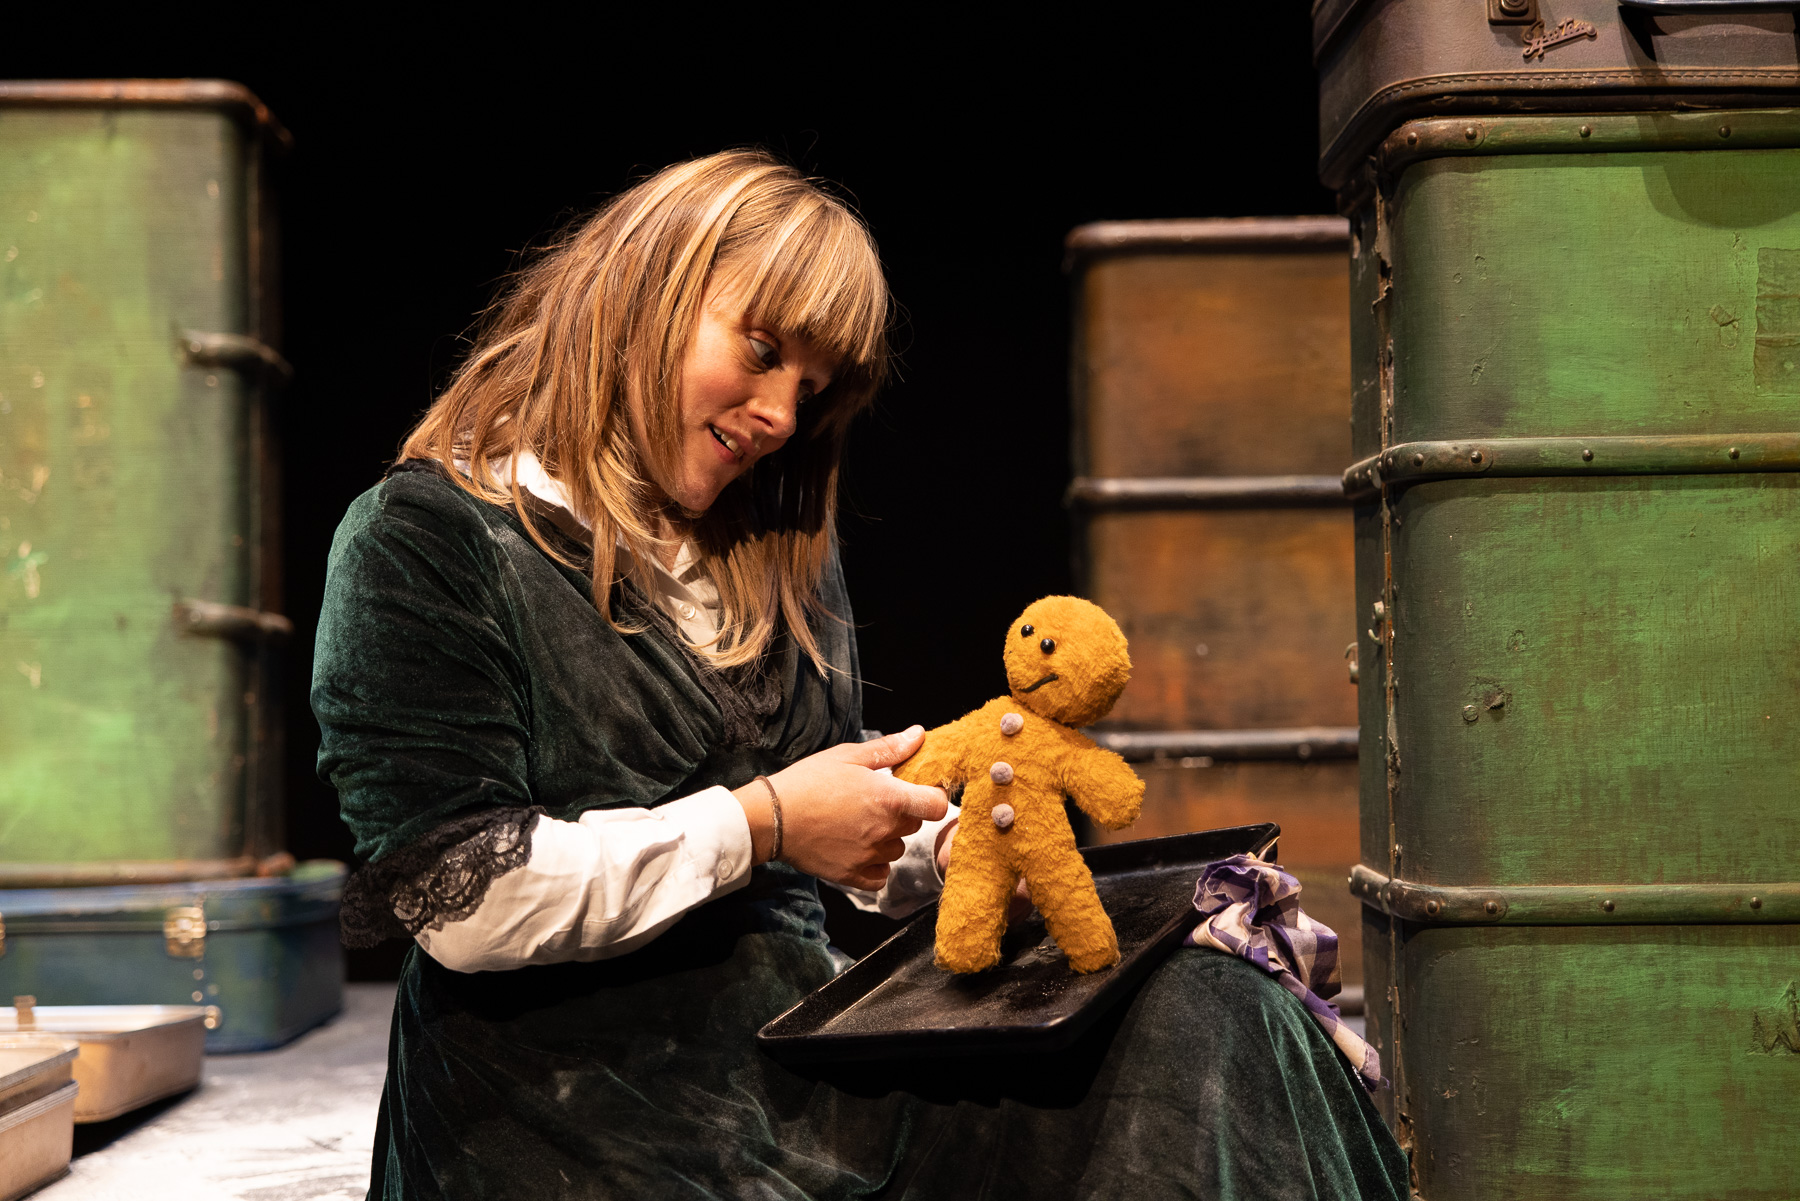 A performer on stage with a puppet of The Gingerbread Man